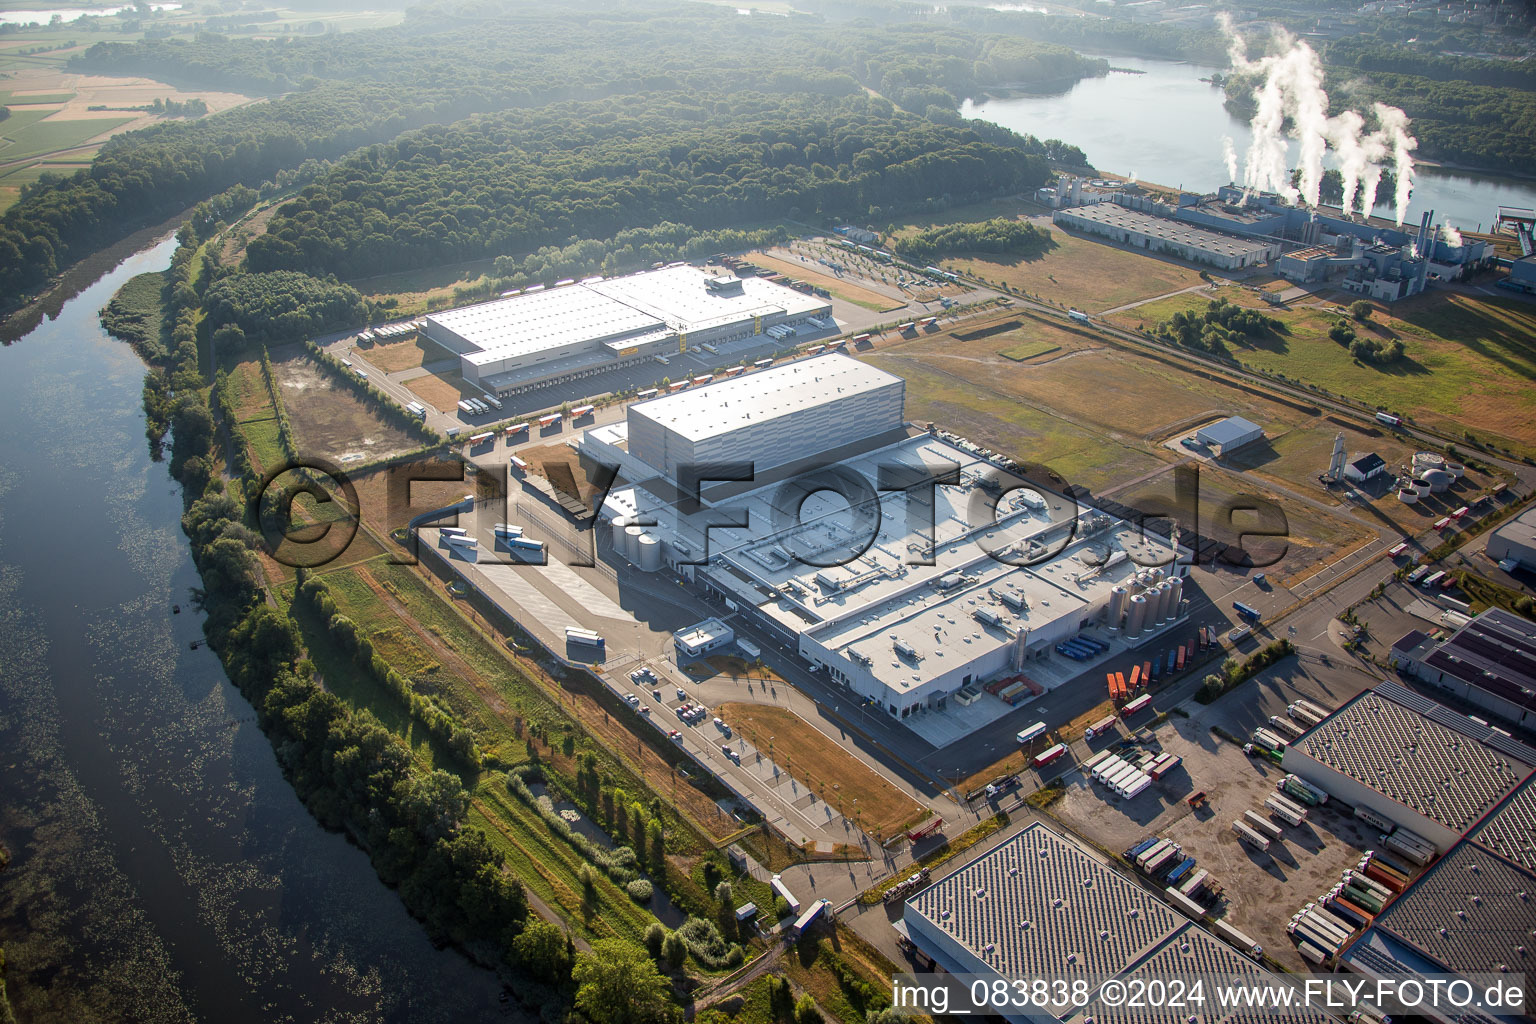 Oblique view of Building and production halls on the premises of Pfaelzer Erfrischungsgetraenke GmbH in Woerth am Rhein in the state Rhineland-Palatinate, Germany